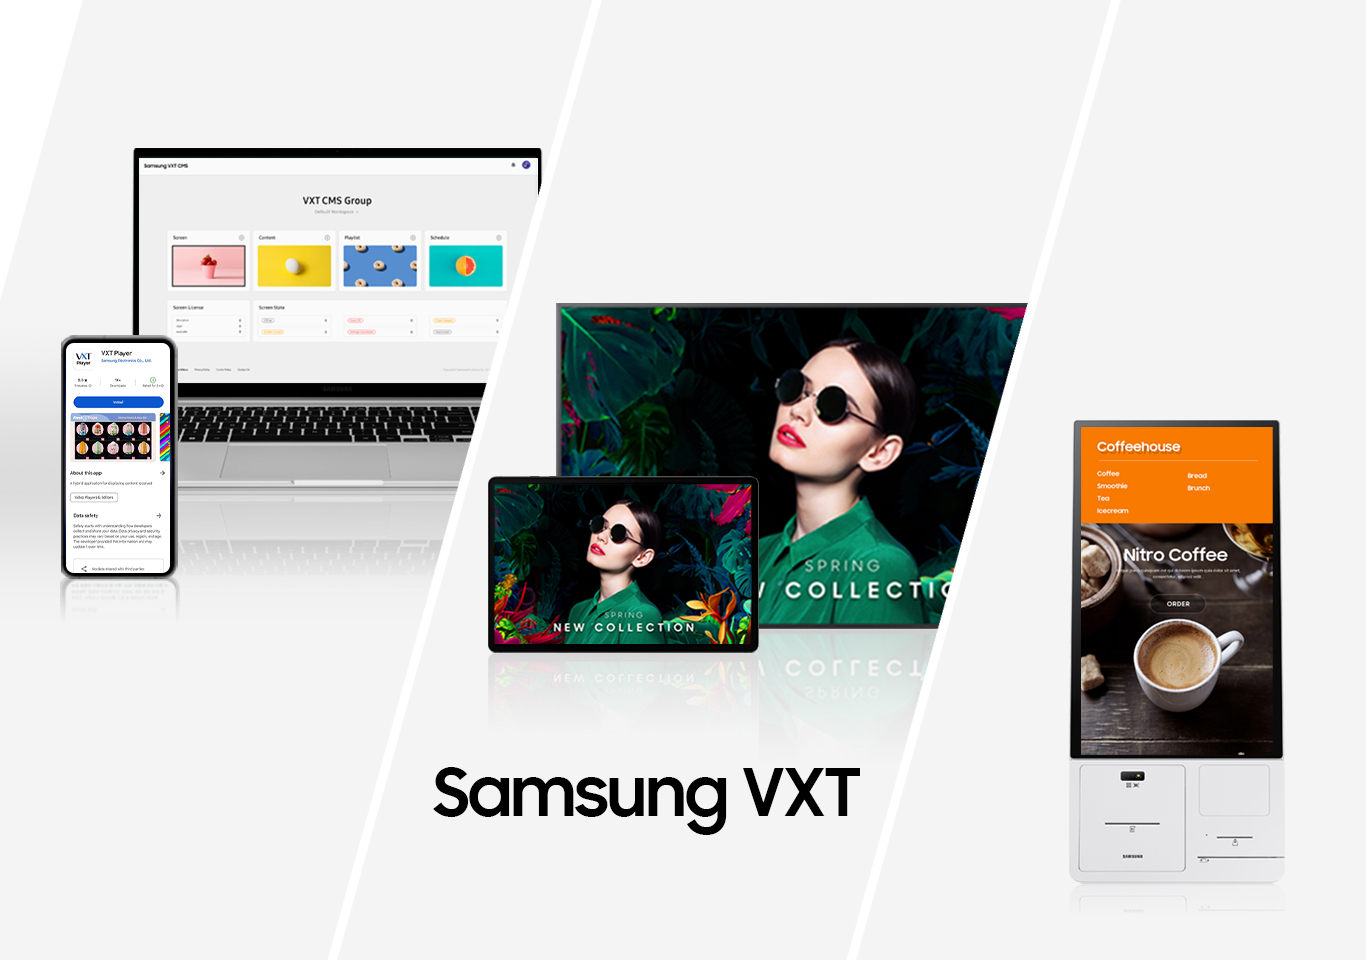 Samsung VXT used to display signs for fashion and coffee